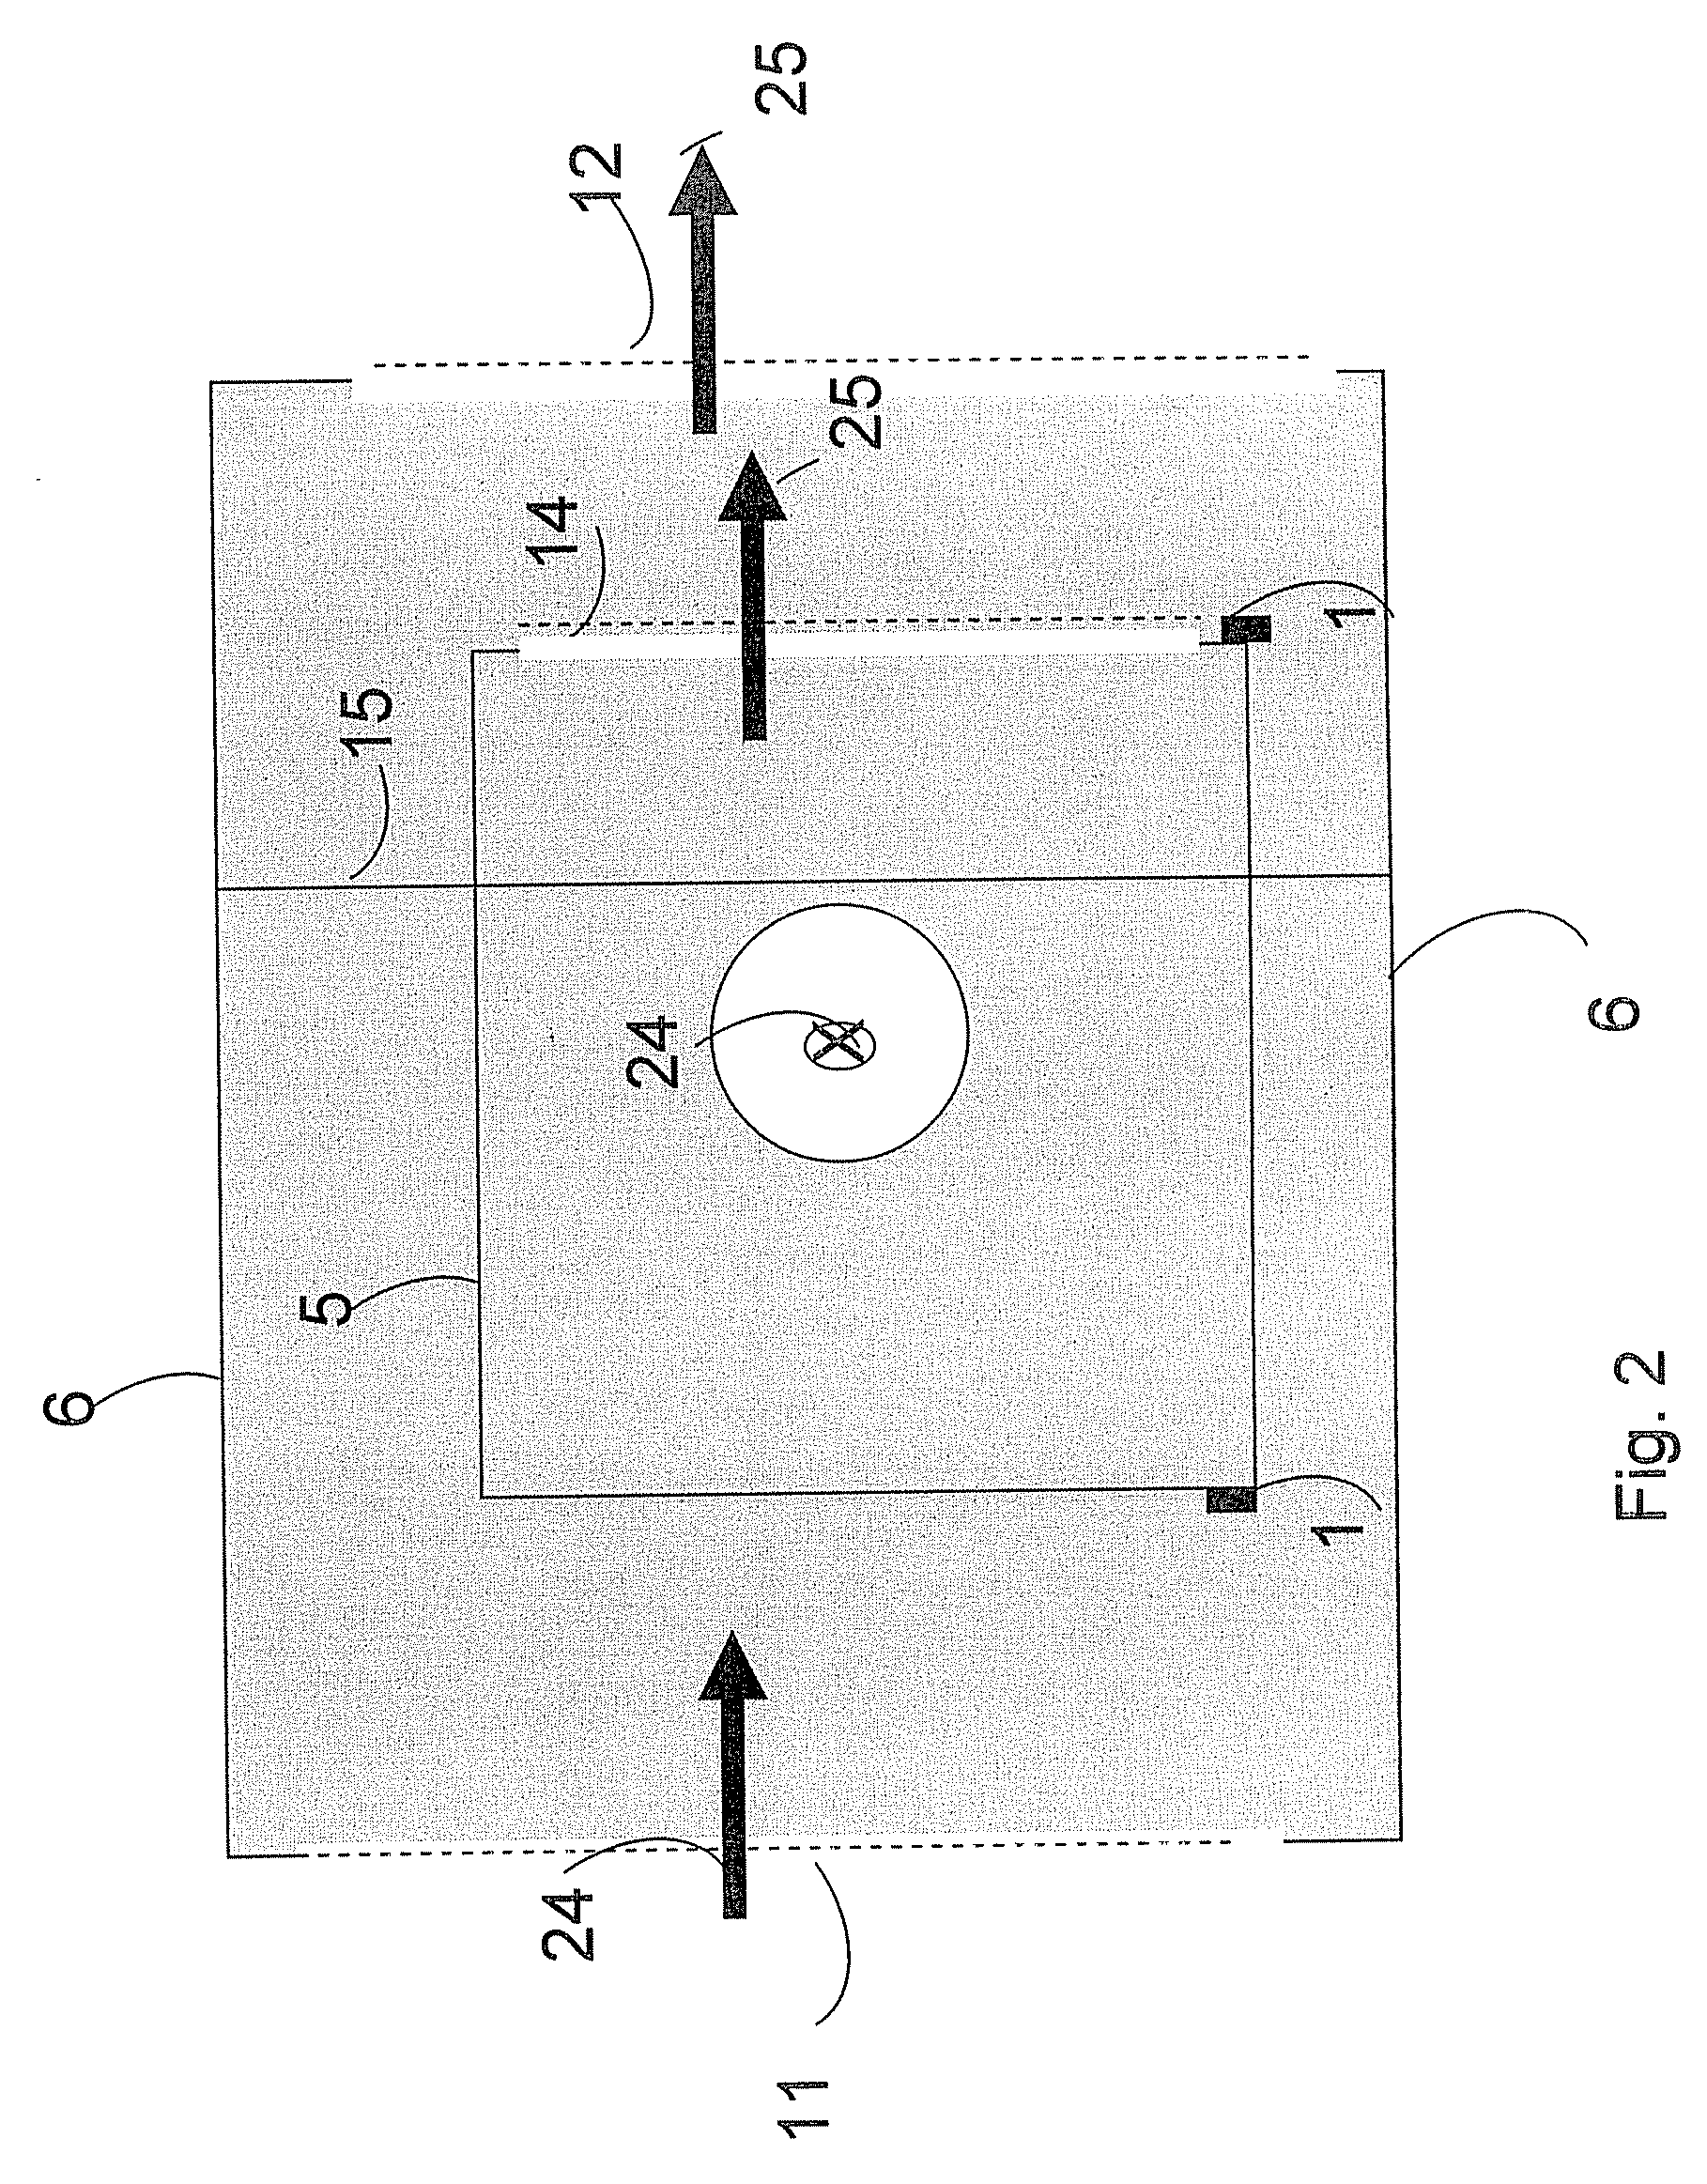 Device for transfer of heat